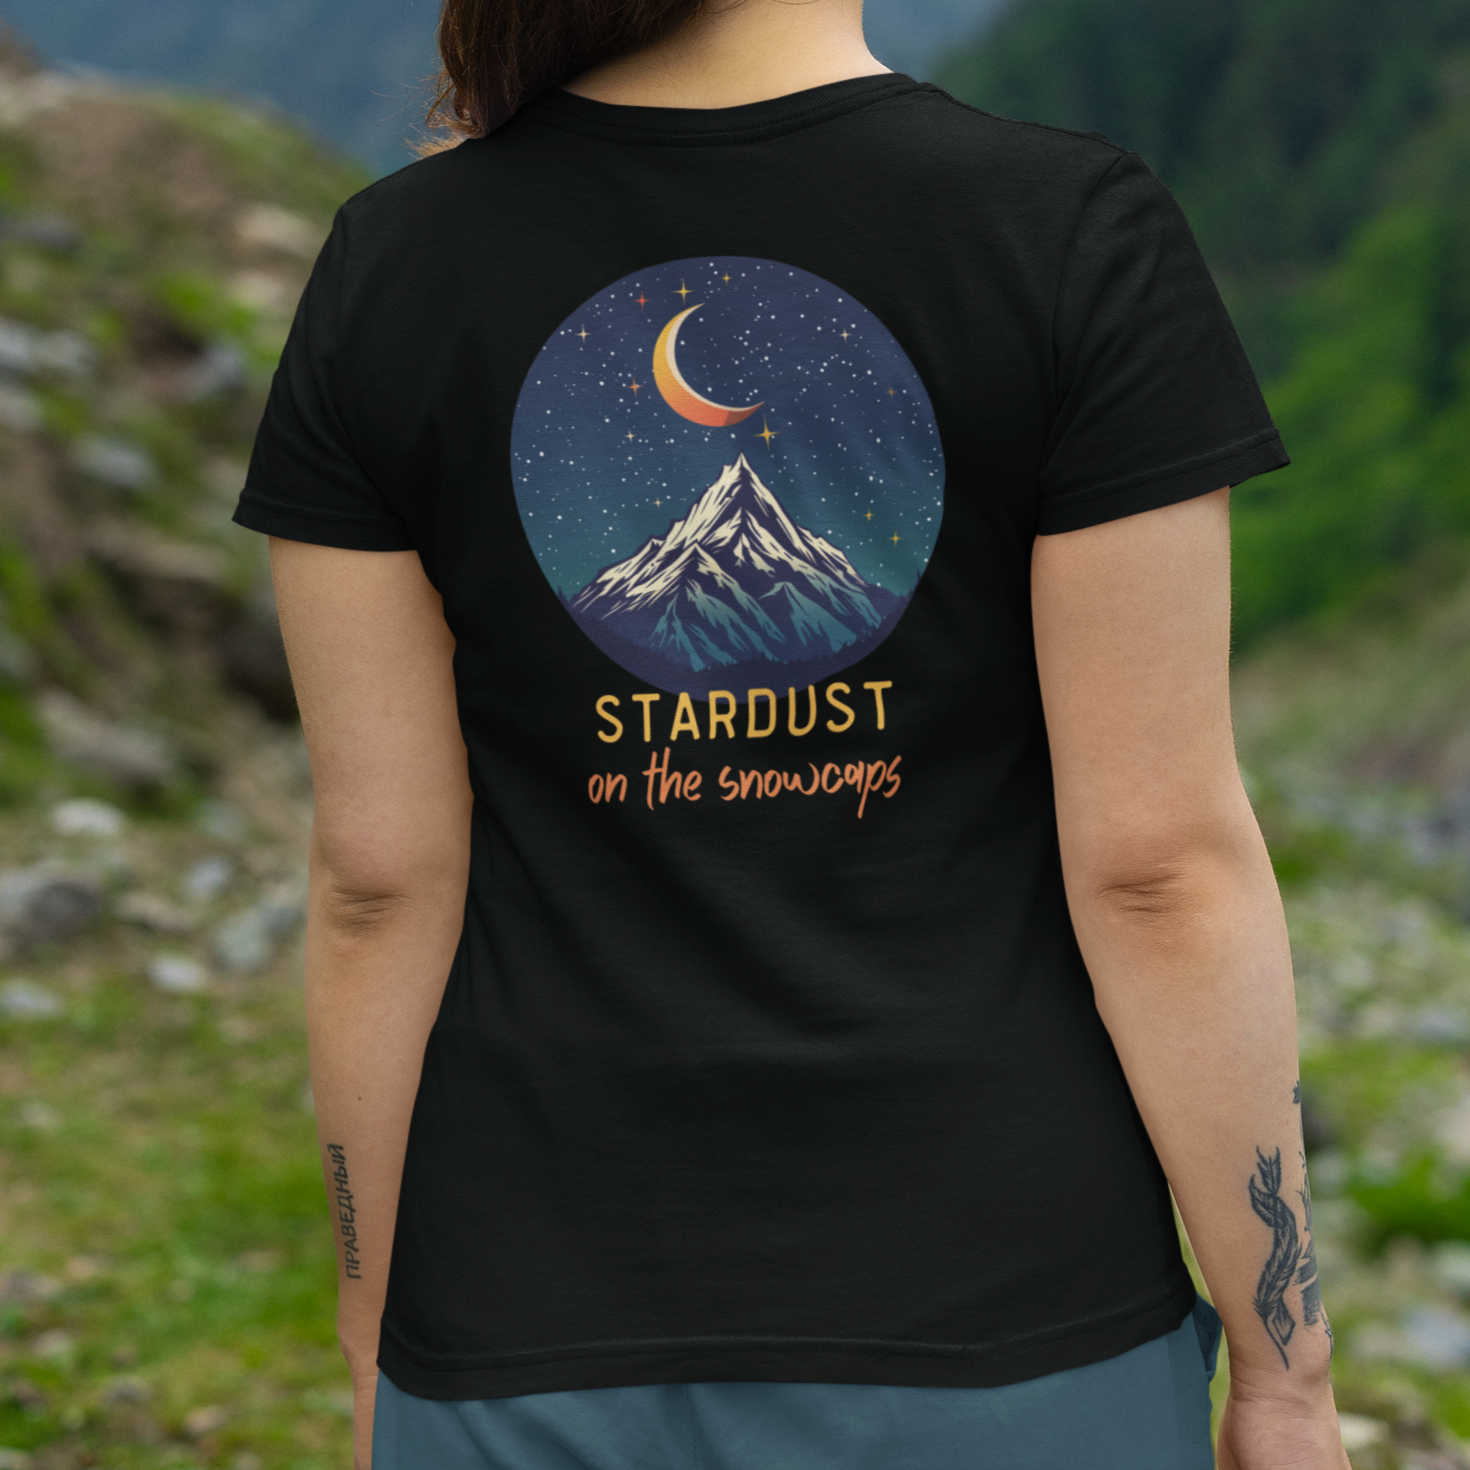 Stardust Tee - Back Graphic